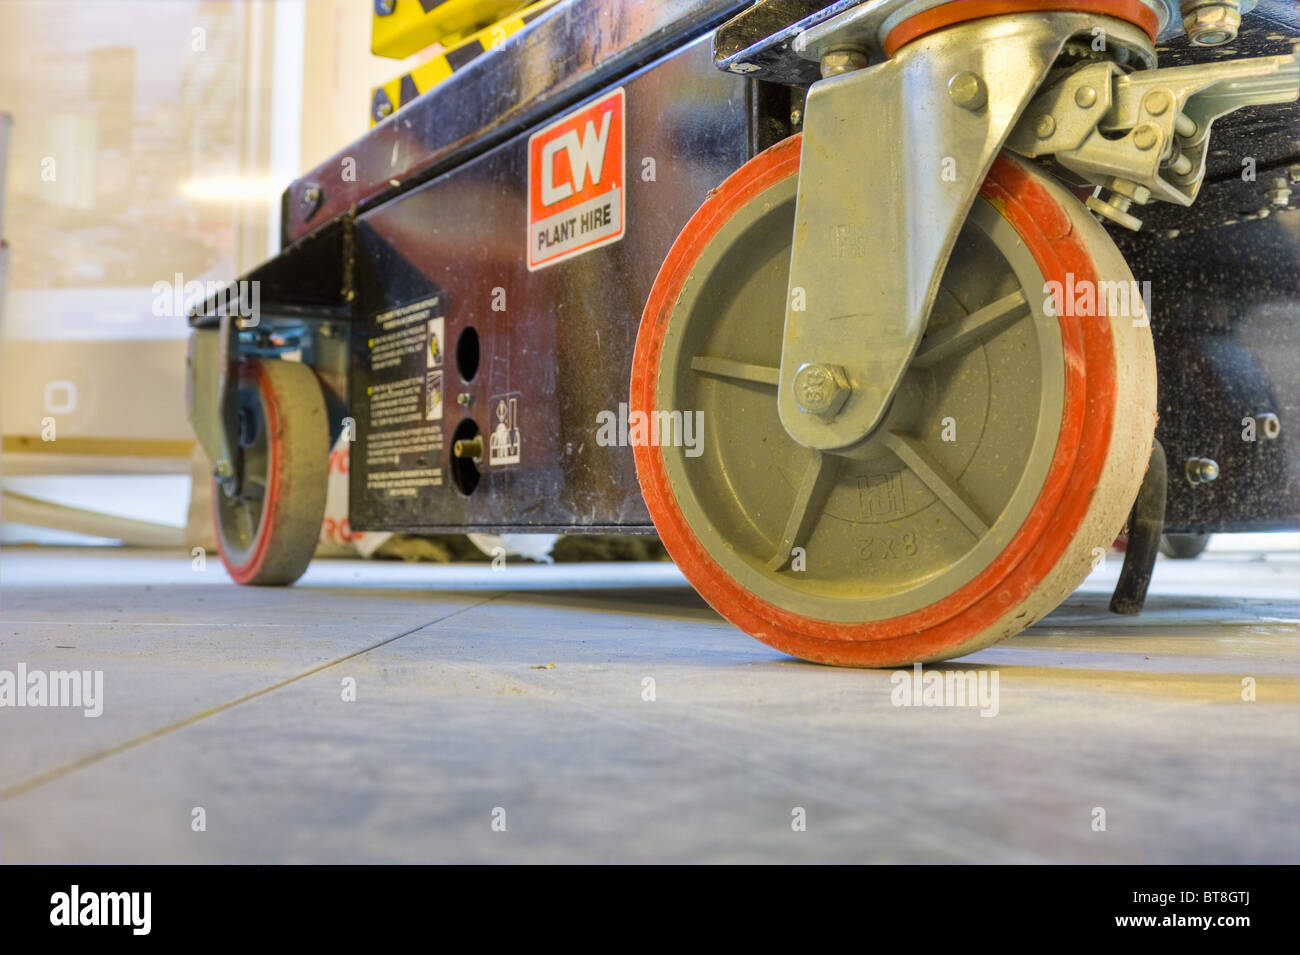 wheels on base of a mobile platform used in building and construction Stock Photo